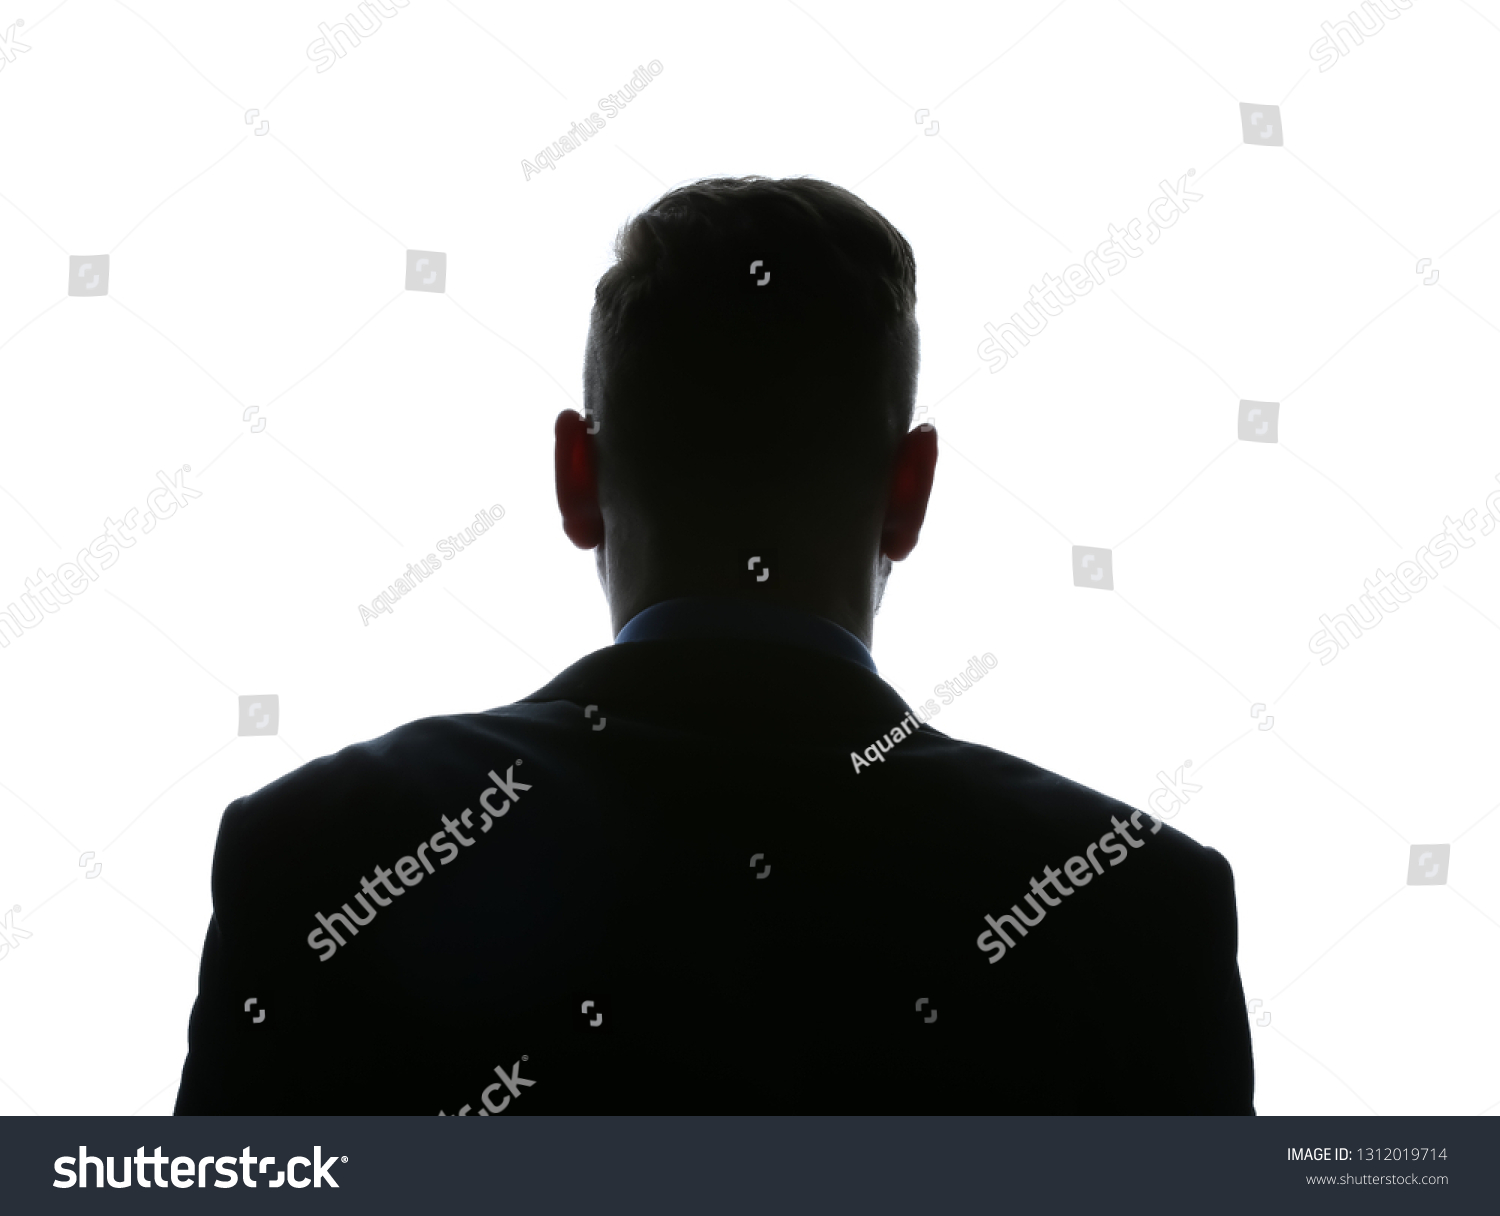 Silhouette of businessman on white background, back view #1312019714